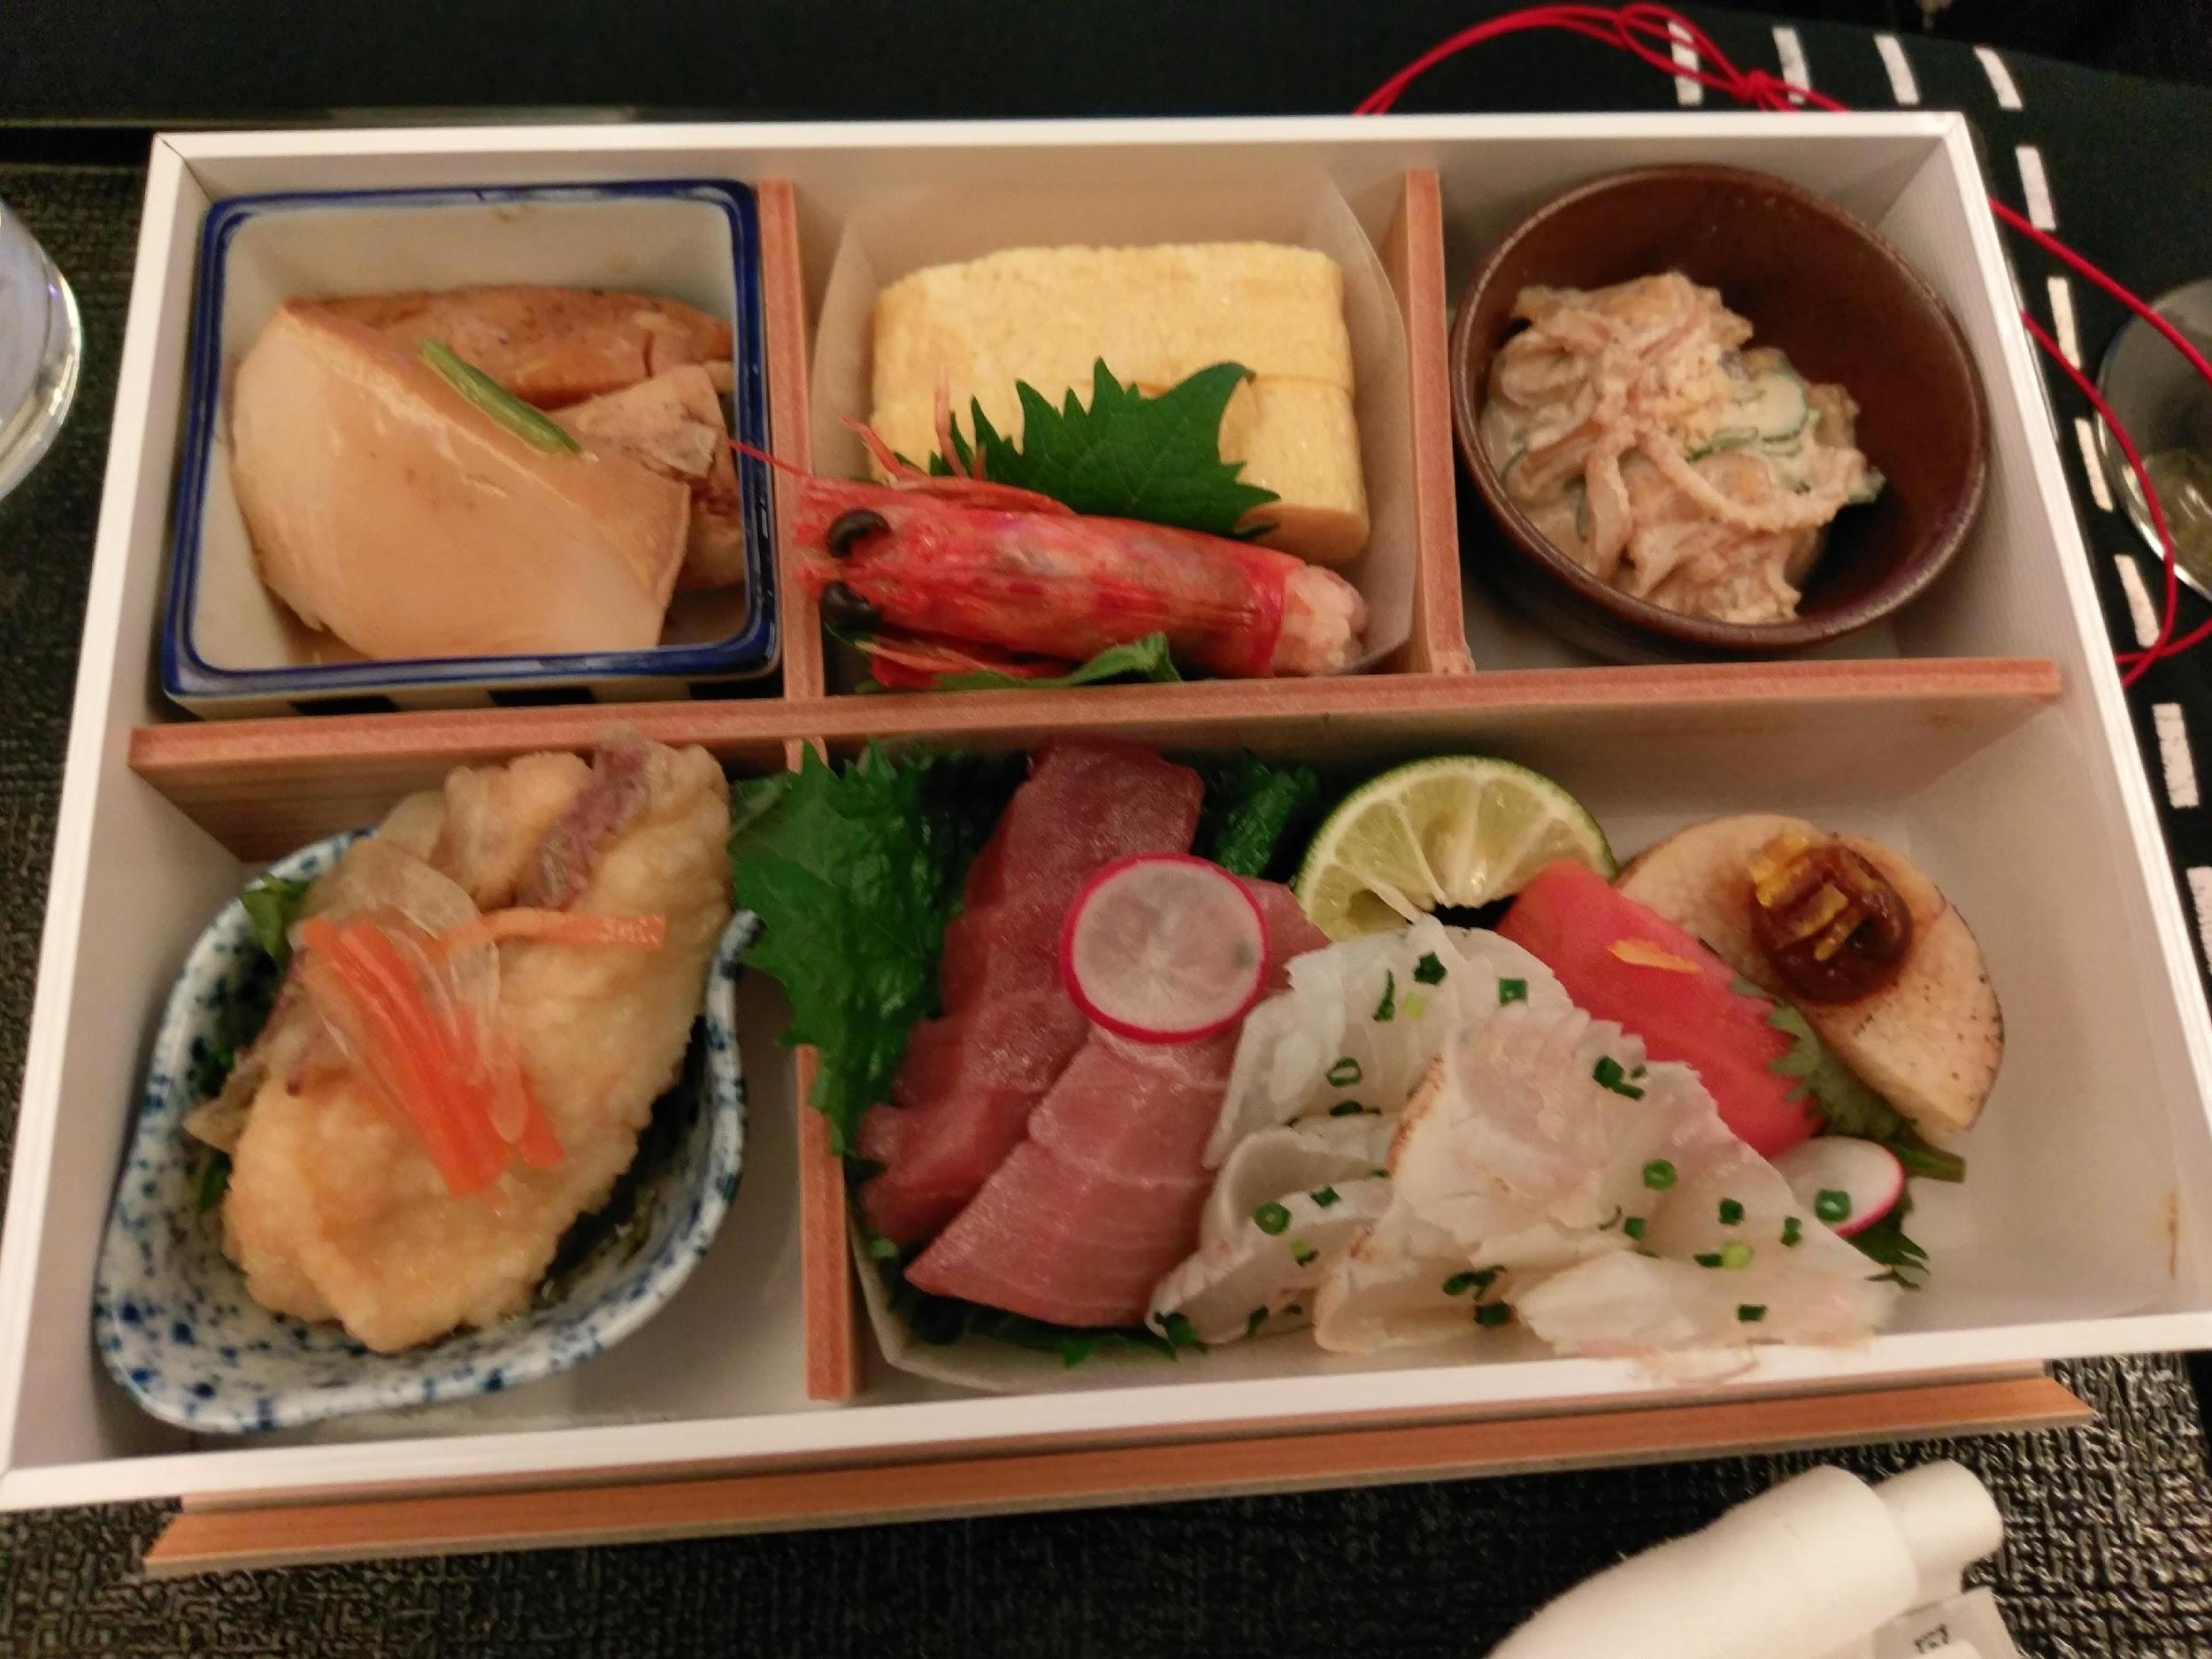 Japan Airlines 787 Business Class food